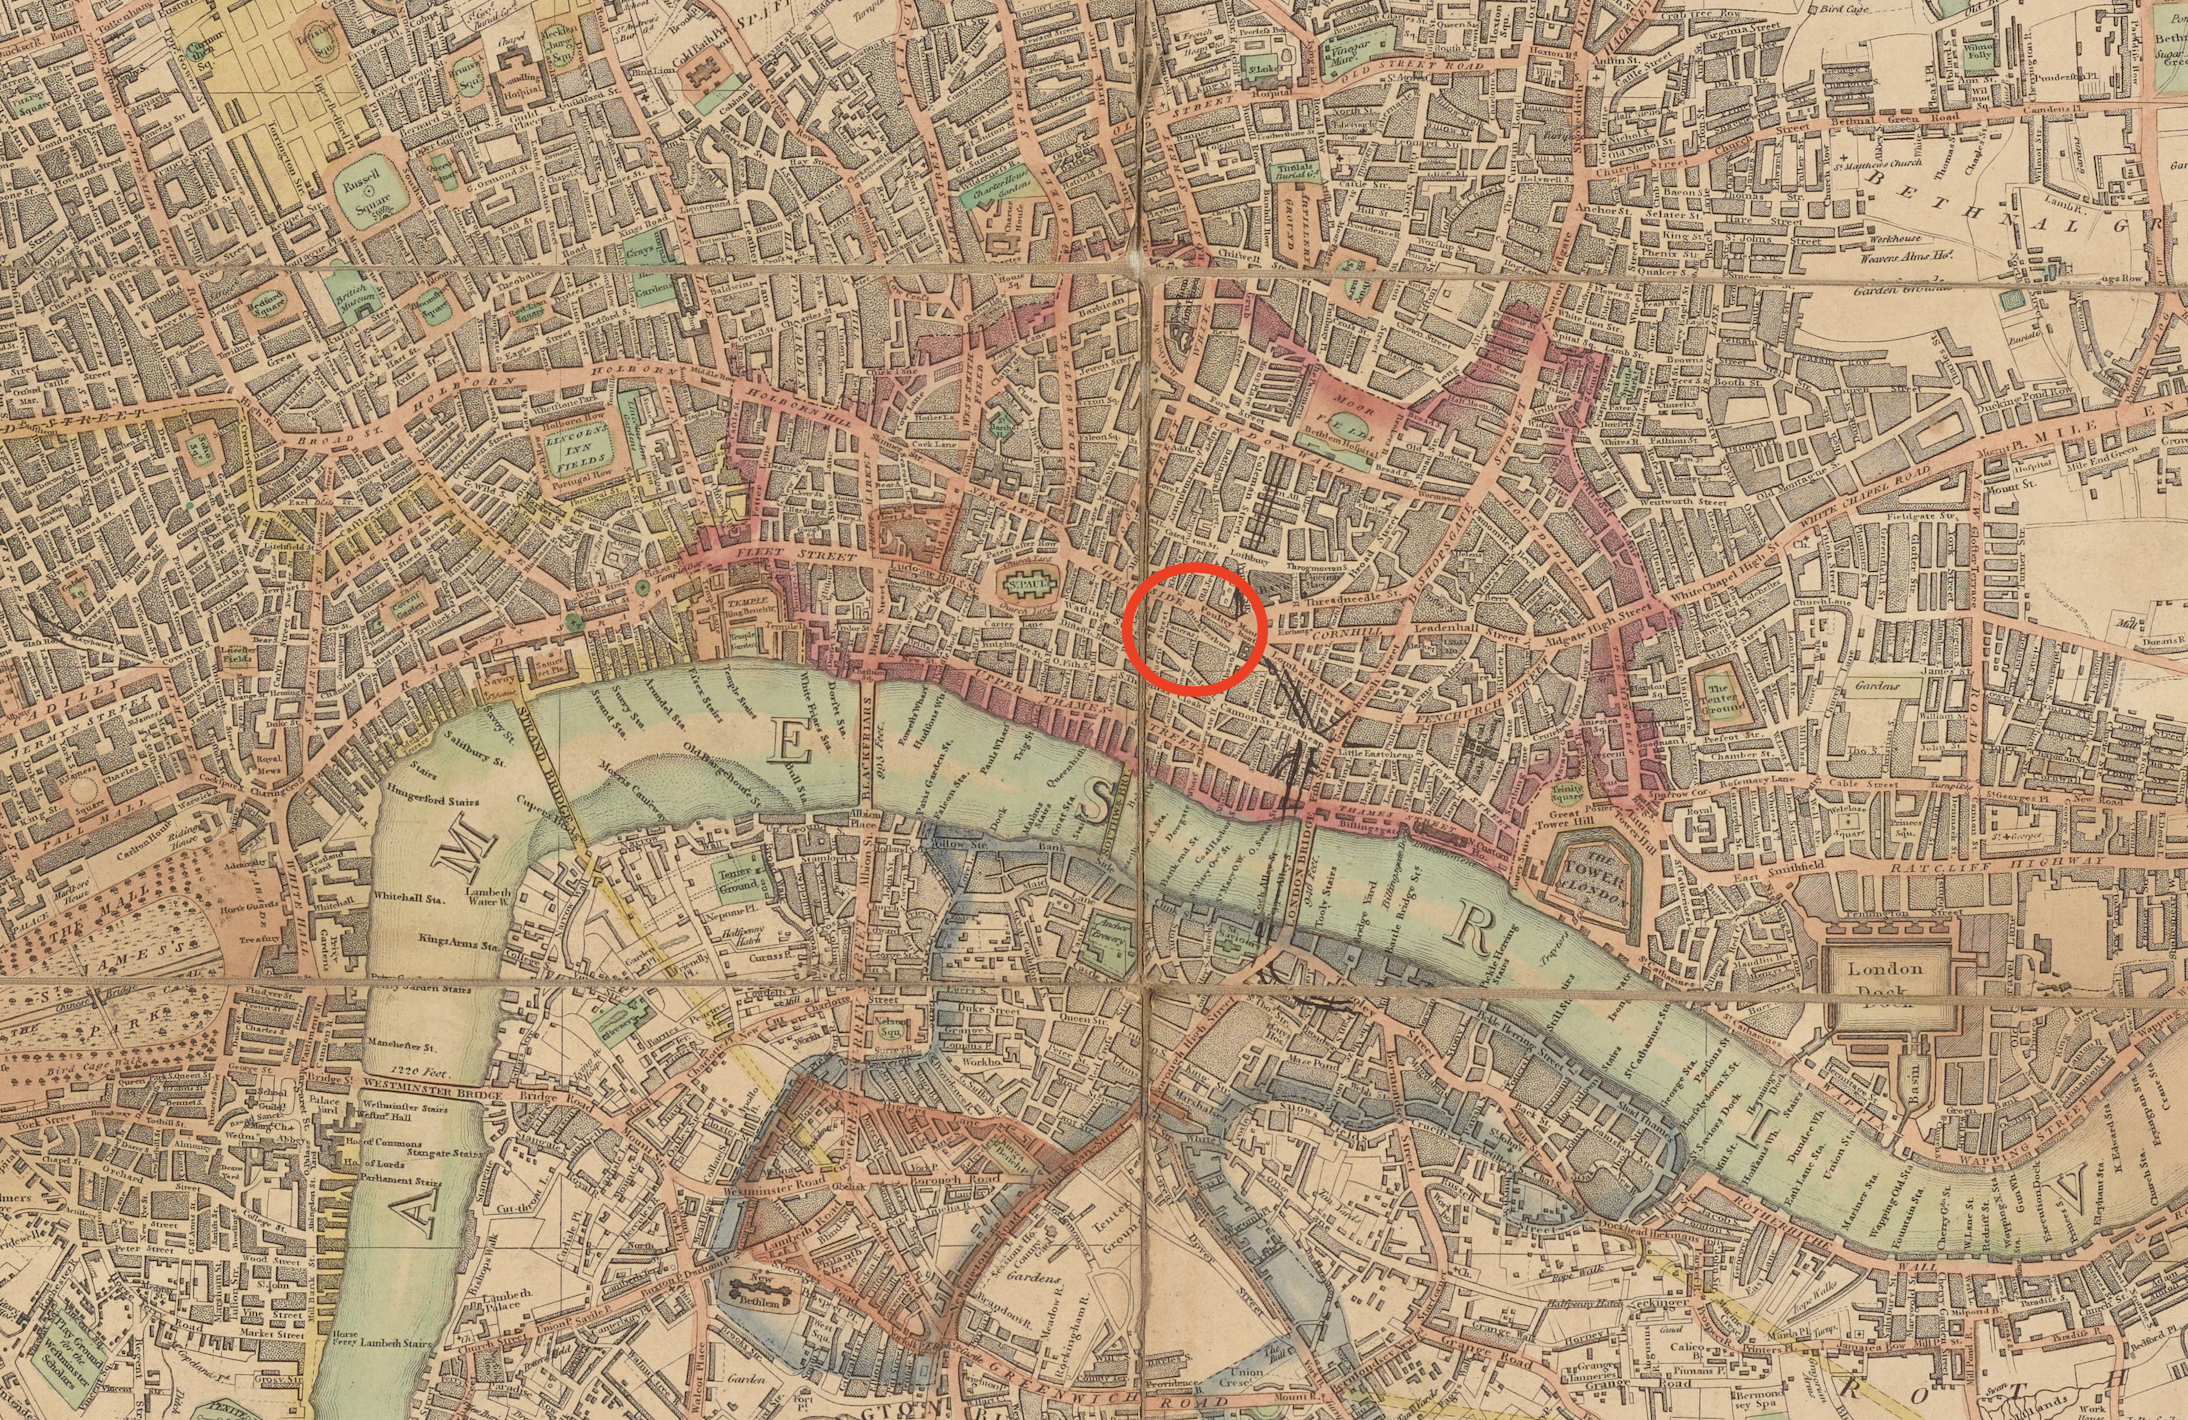 Laurie and Whittle’s London, 1817. Circled: Poultry, Cheapside, Pancras Lane.
        Click to enlarge.